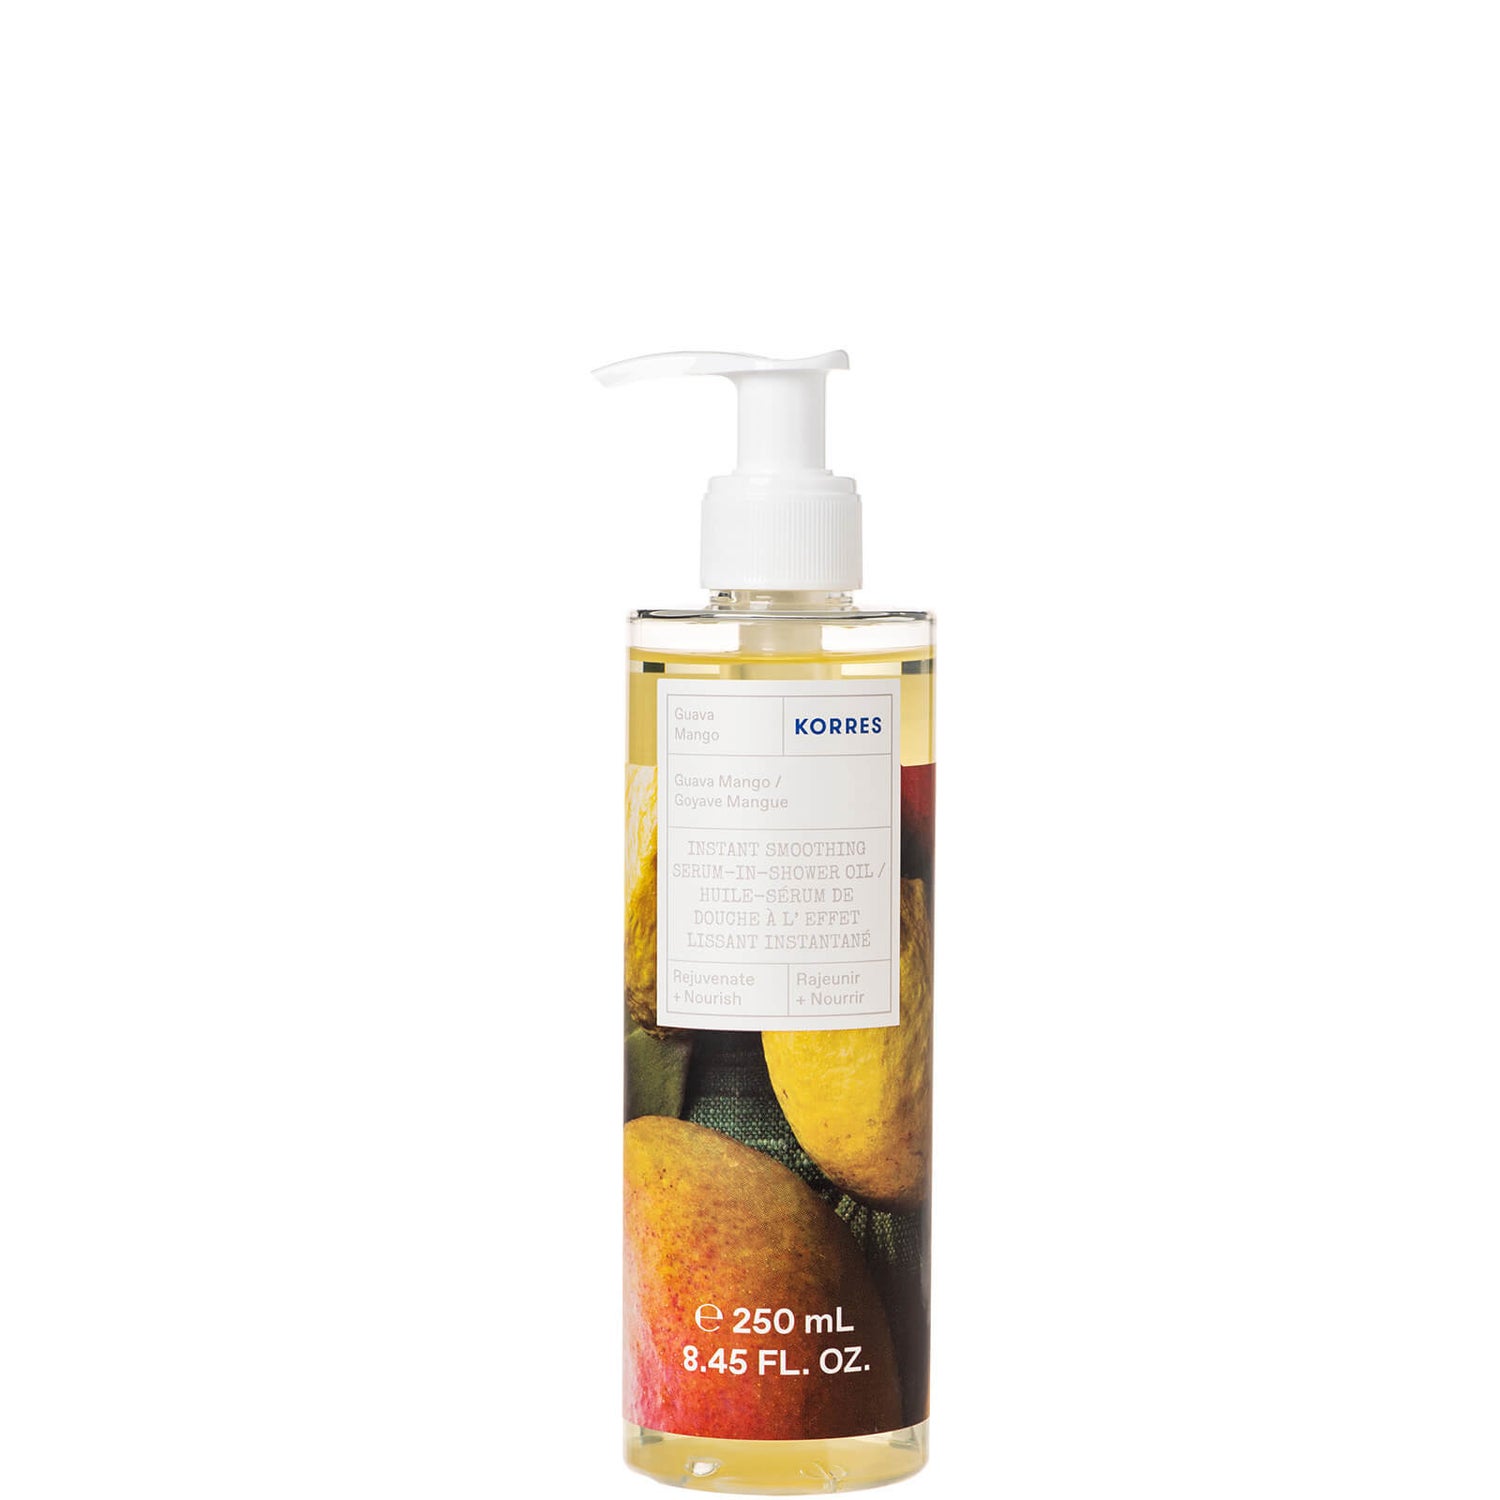 KORRES Guava Mango Instant Smoothing Serum-In-Shower Oil 250ml